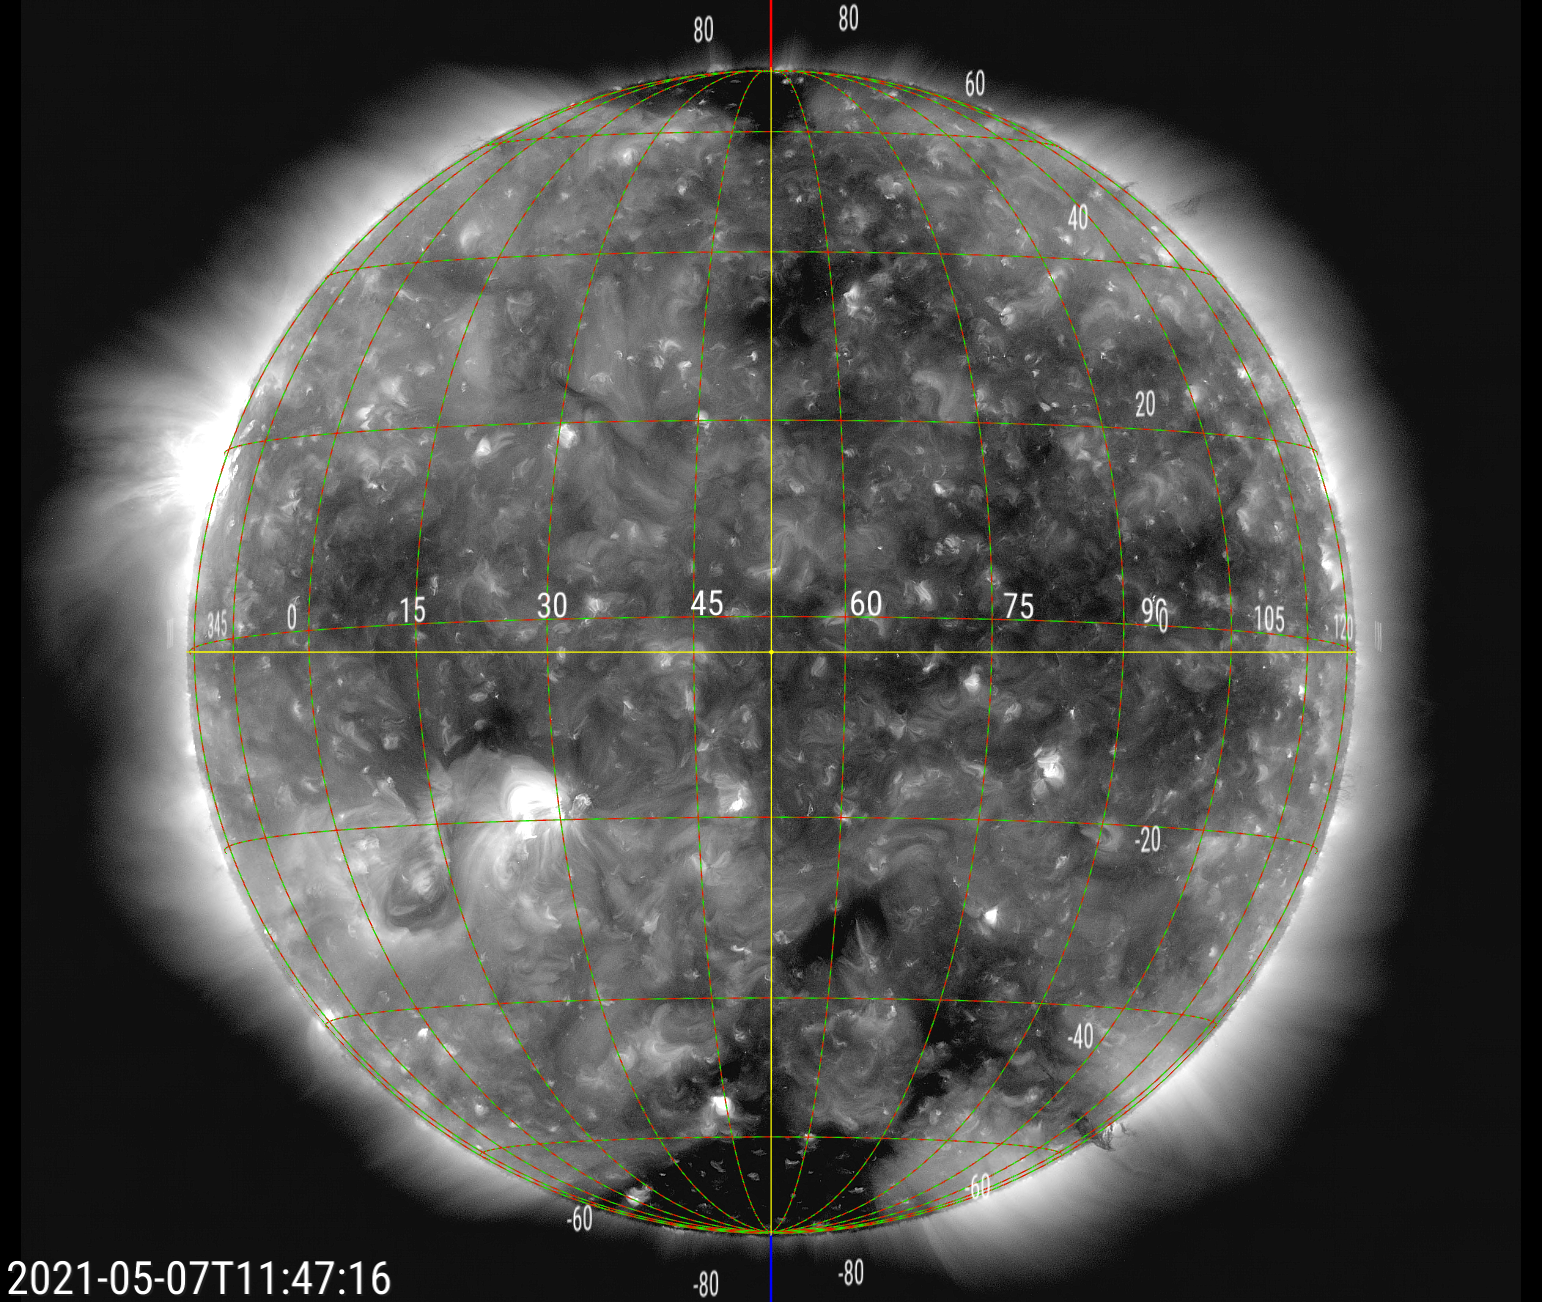 SDO AIA image corresponding to the above May 7 map